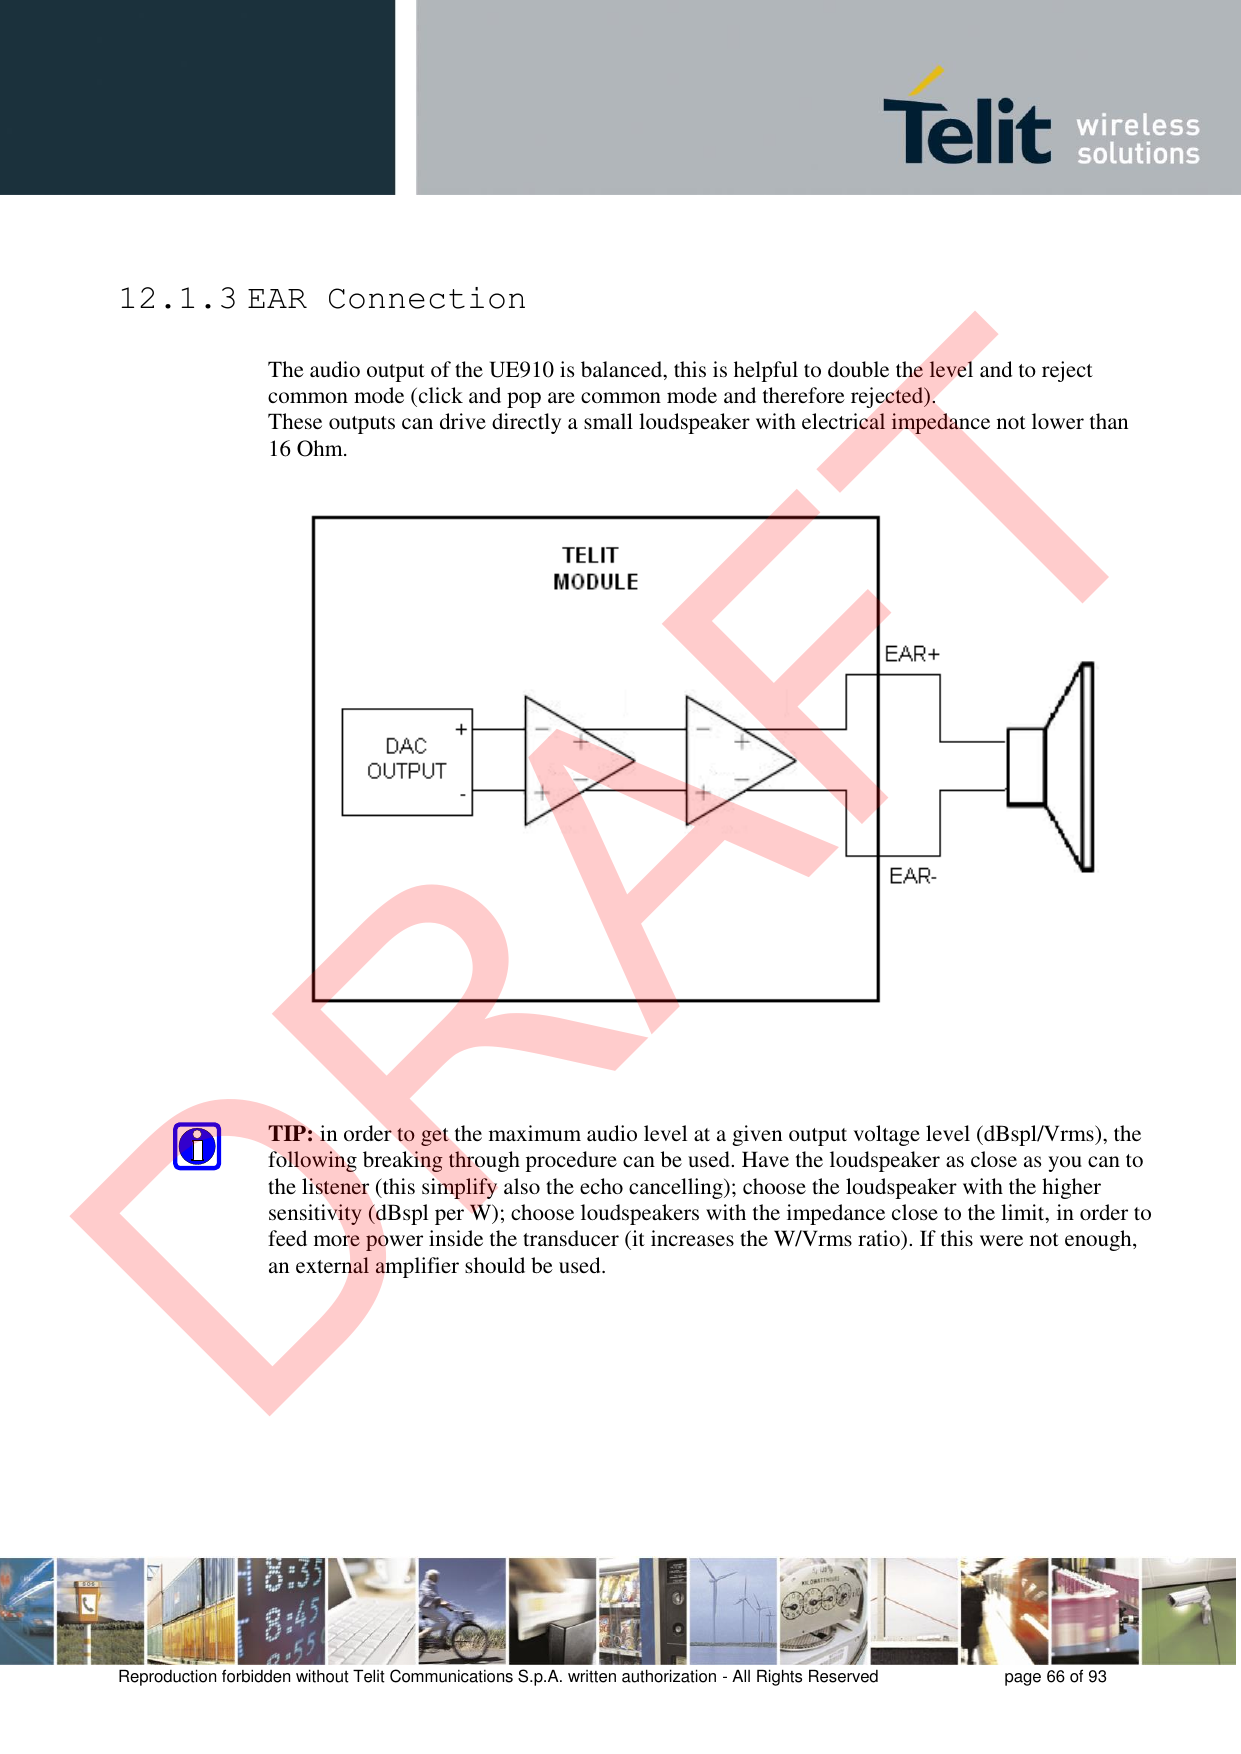 Reproduction forbidden without Telit Communications S.p.A. written authorization - All Rights Reserved  page 66 of 93 12.1.3 EAR Connection The audio output of the UE910 is balanced, this is helpful to double the level and to reject common mode (click and pop are common mode and therefore rejected). These outputs can drive directly a small loudspeaker with electrical impedance not lower than 16 Ohm. TIP: in order to get the maximum audio level at a given output voltage level (dBspl/Vrms), the following breaking through procedure can be used. Have the loudspeaker as close as you can to the listener (this simplify also the echo cancelling); choose the loudspeaker with the higher sensitivity (dBspl per W); choose loudspeakers with the impedance close to the limit, in order to feed more power inside the transducer (it increases the W/Vrms ratio). If this were not enough, an external amplifier should be used. DRAFT